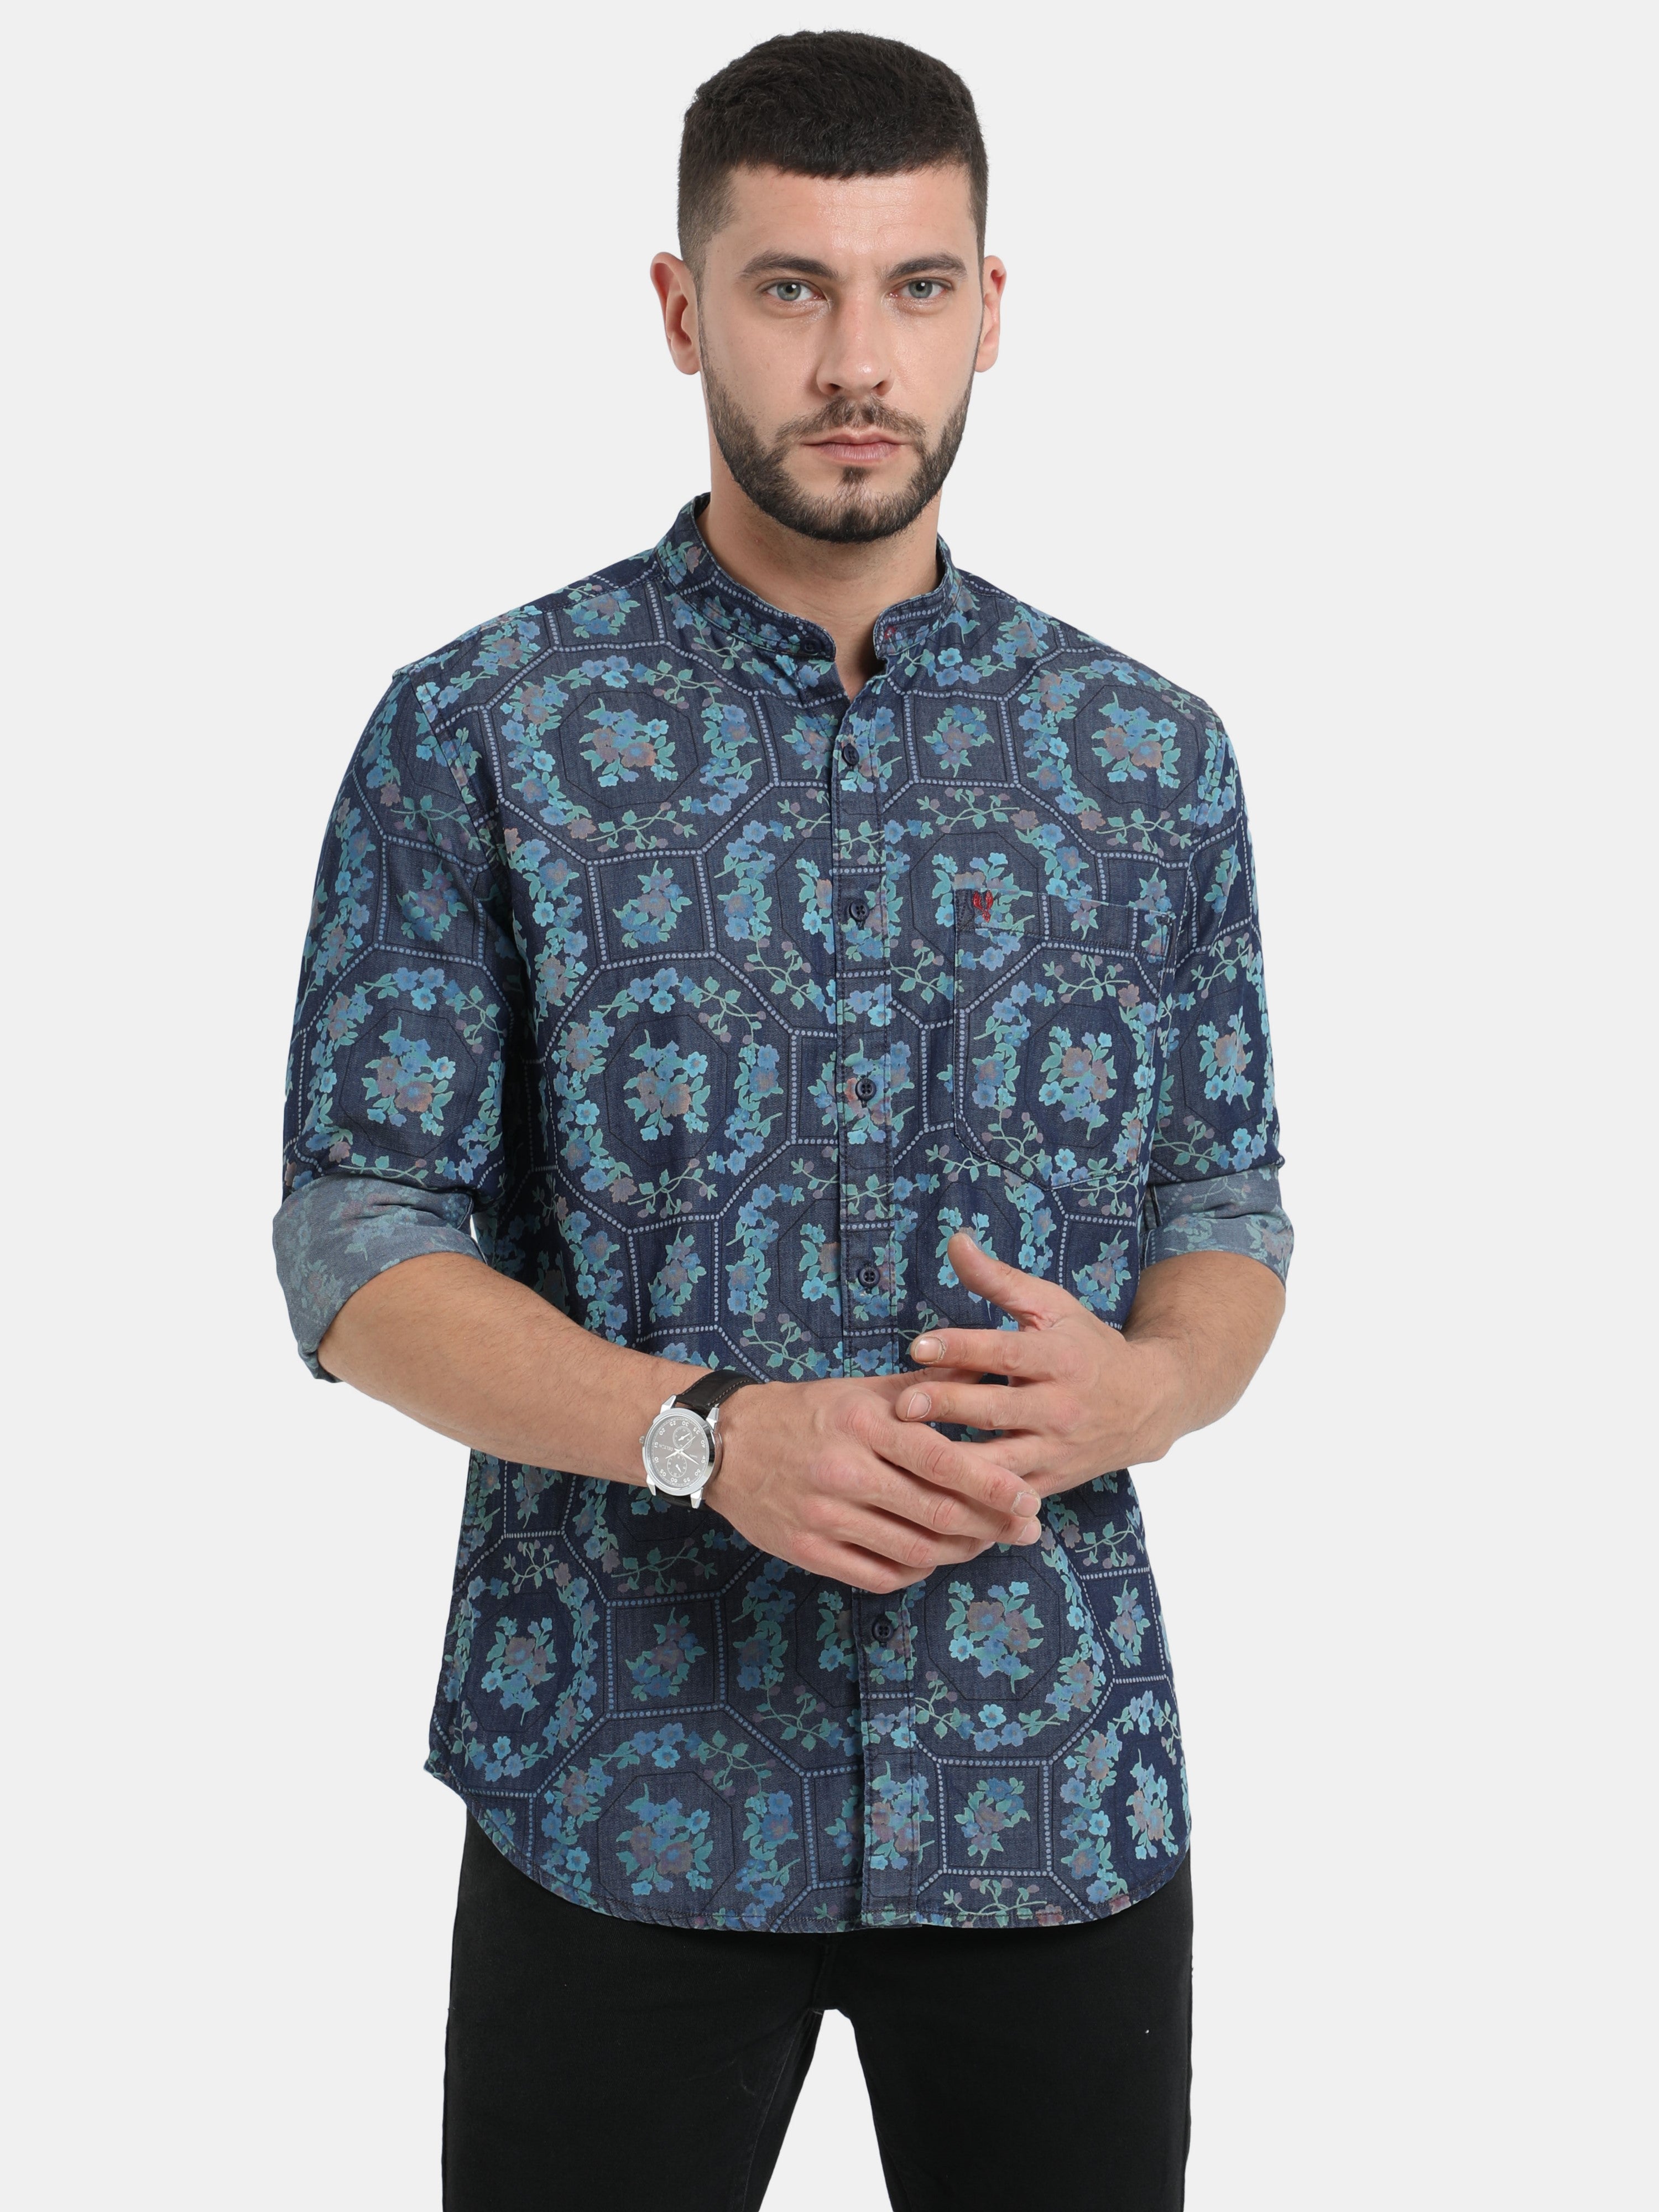 Buy White Printed Full Sleeves Shirt Online in India - Flat 50% Off